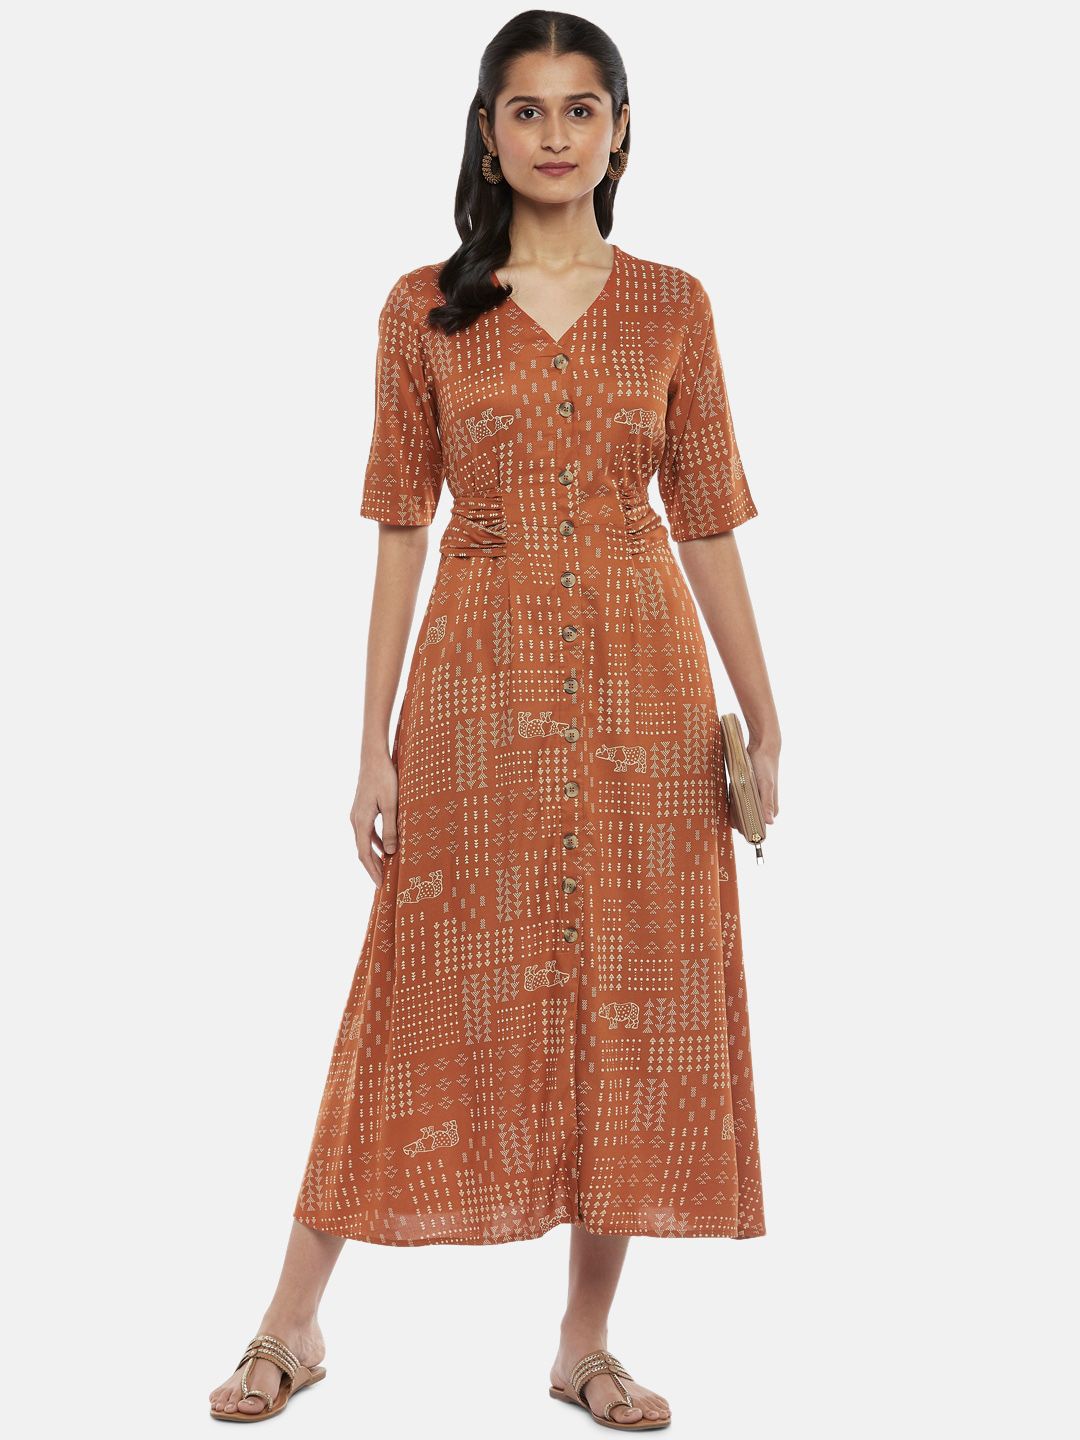 AKKRITI BY PANTALOONS Rust & White Printed A-Line Midi Dress Price in India